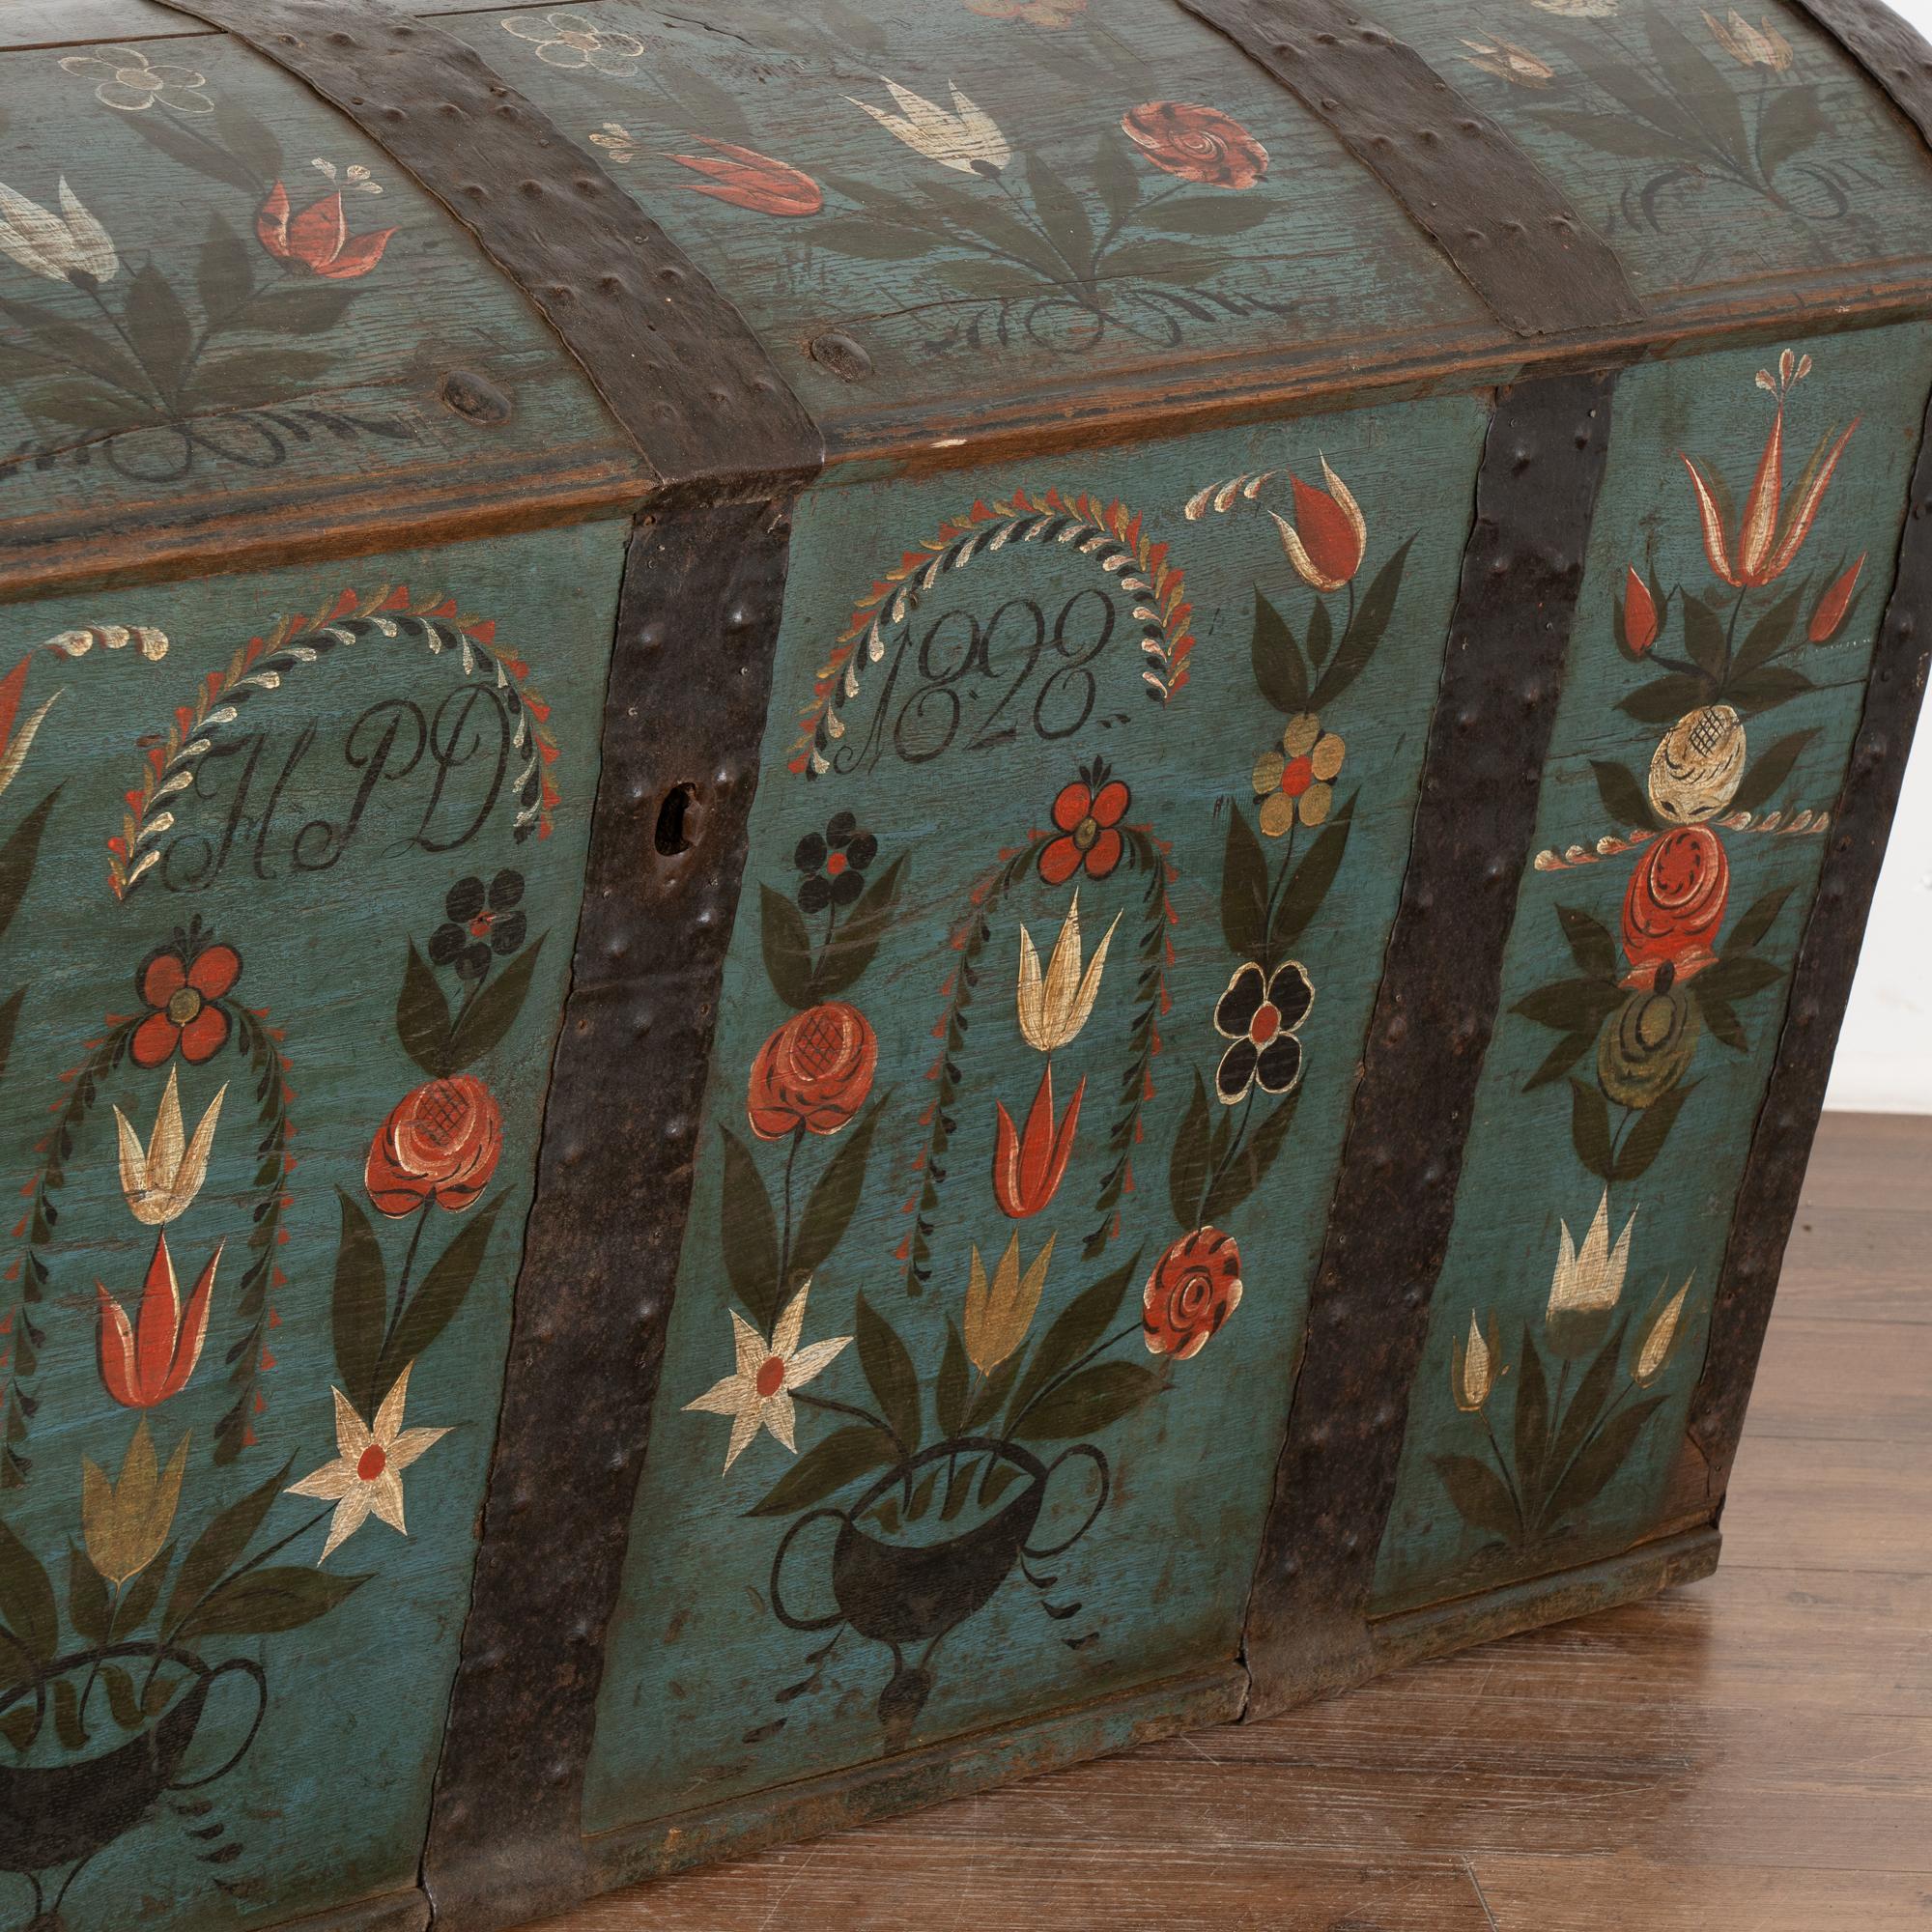 Original Hand Painted Dome Top Blue Trunk With Flowers, Sweden dated 1828 For Sale 1